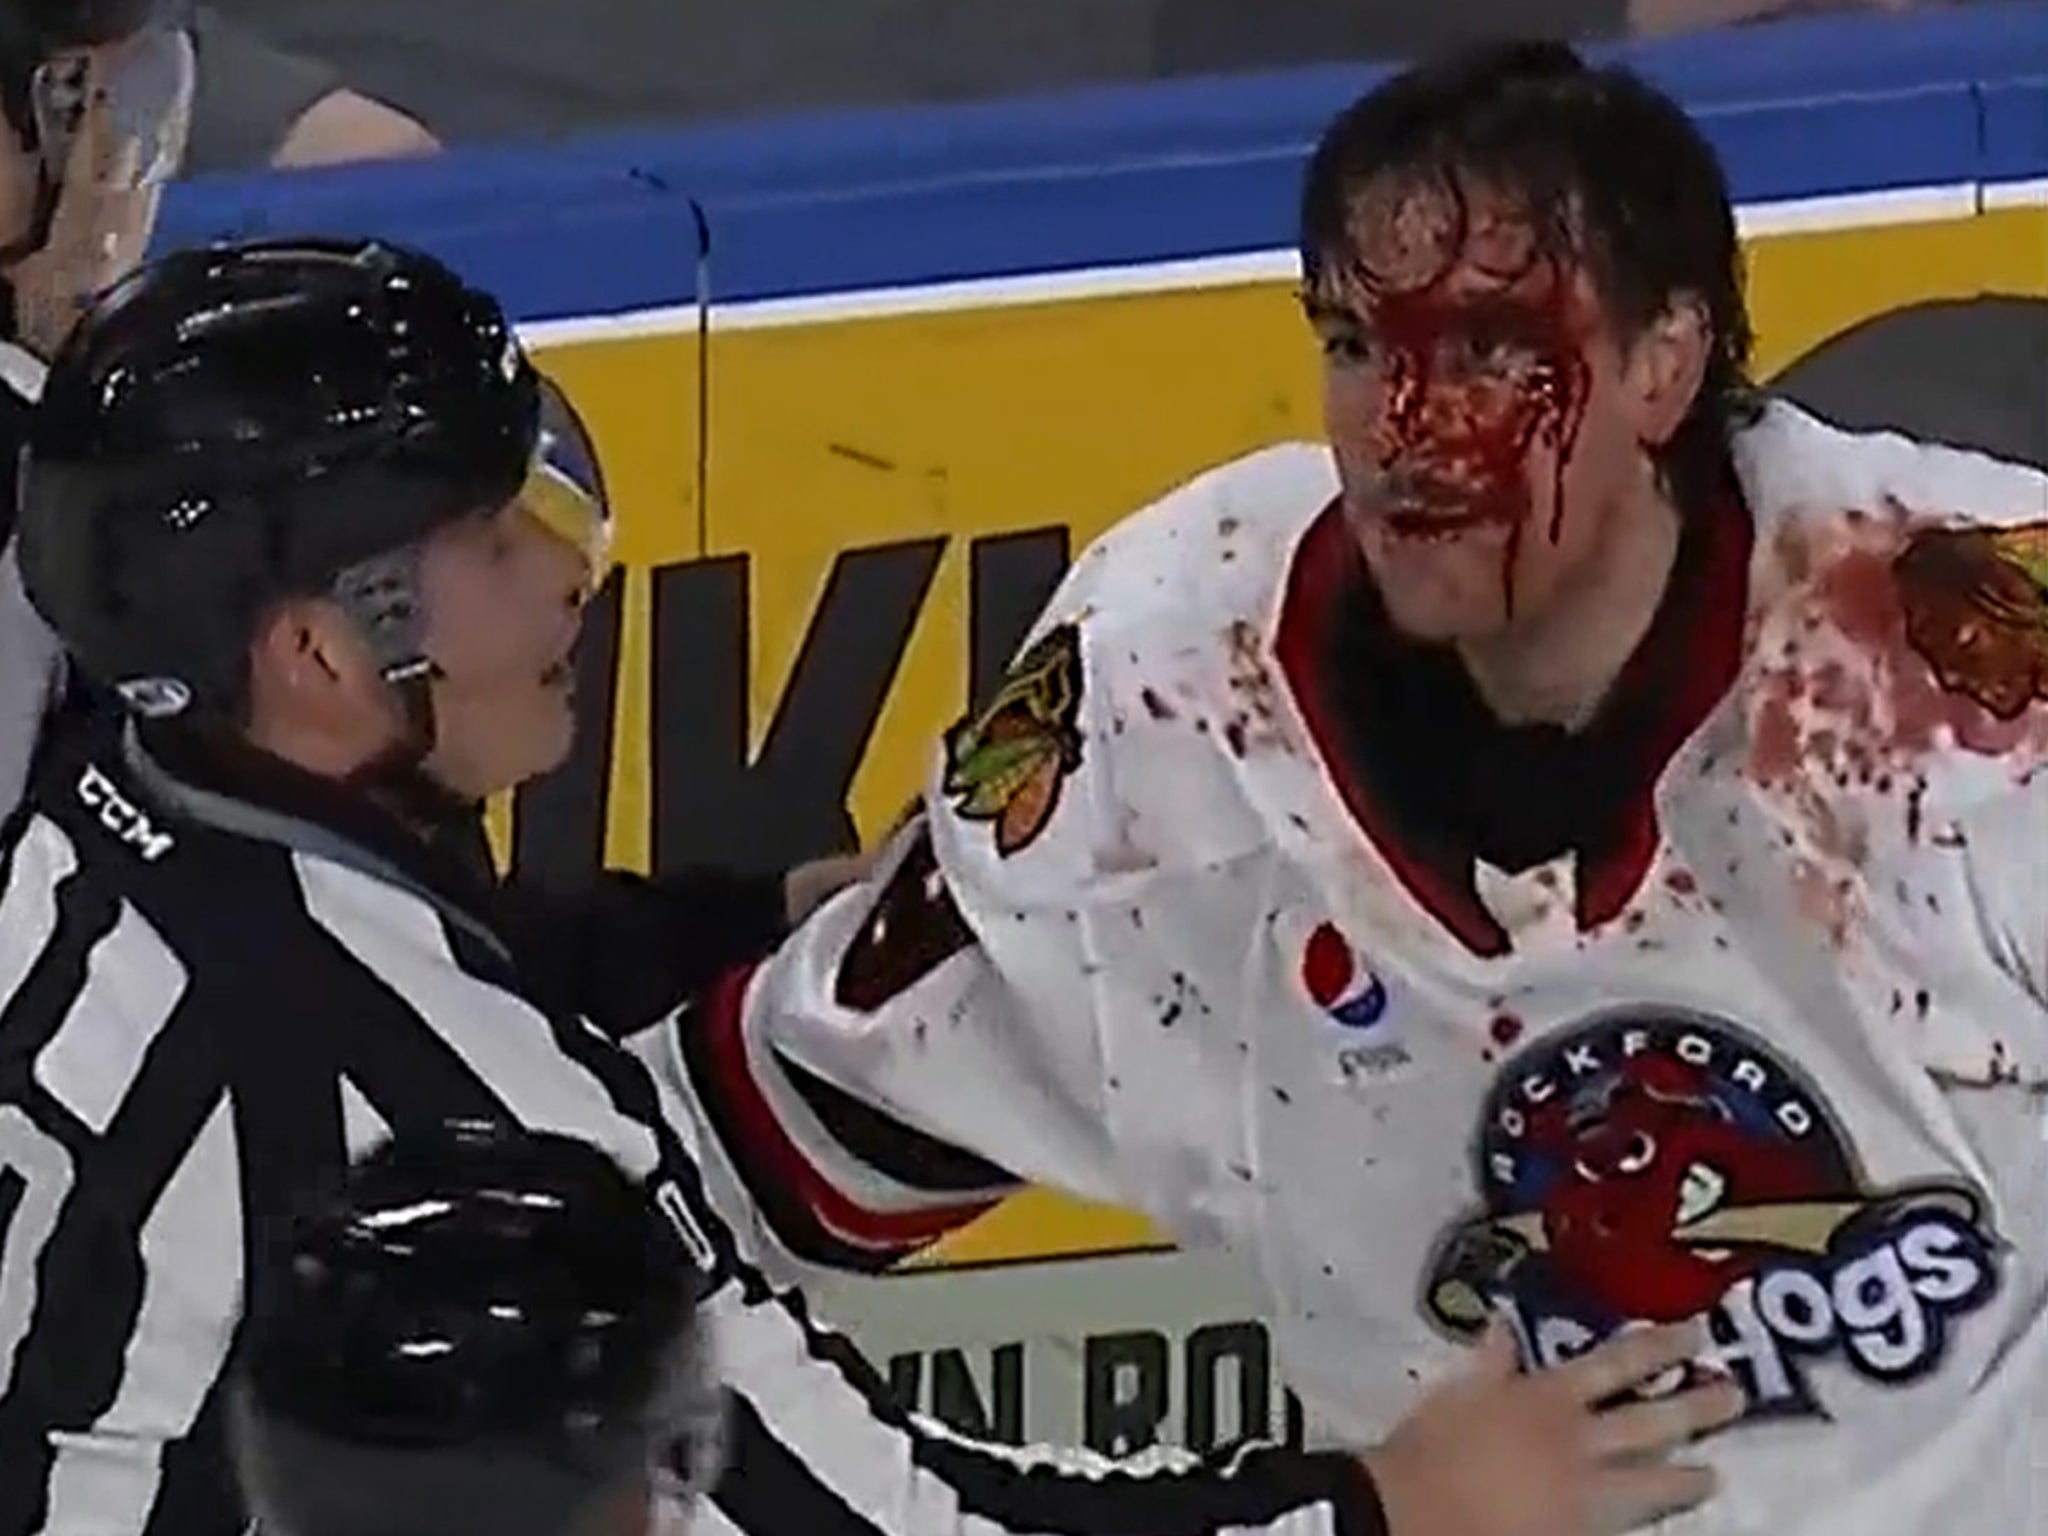 Minor League Hockey Player Left A Bloody Mess After Violent On-Ice Fight